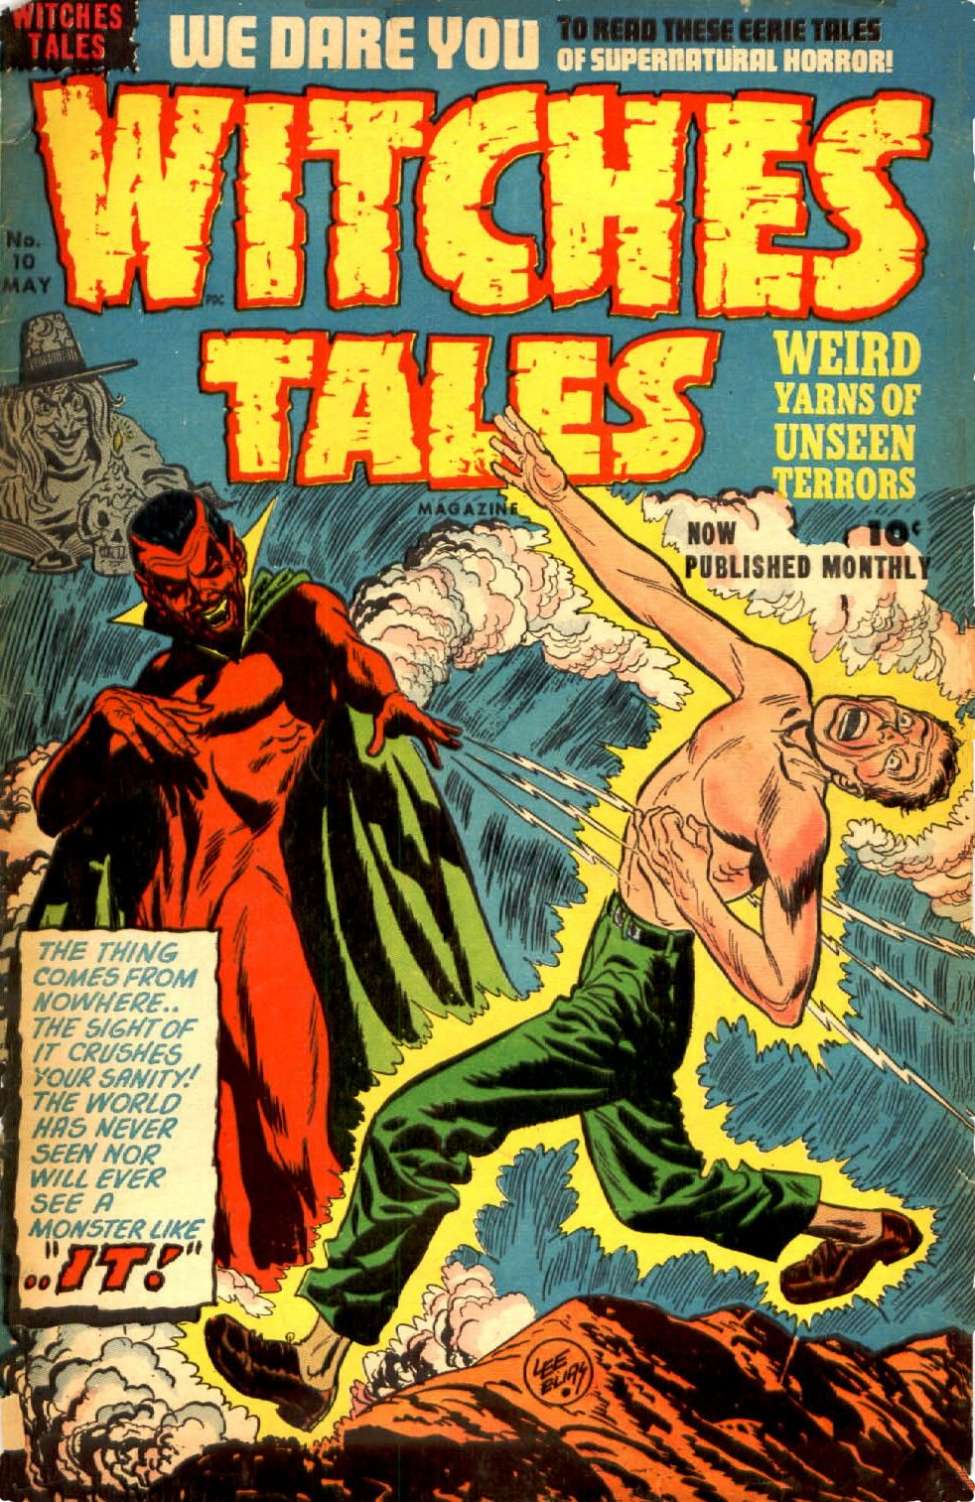 Comic Book Cover For Witches Tales 10 - Version 1